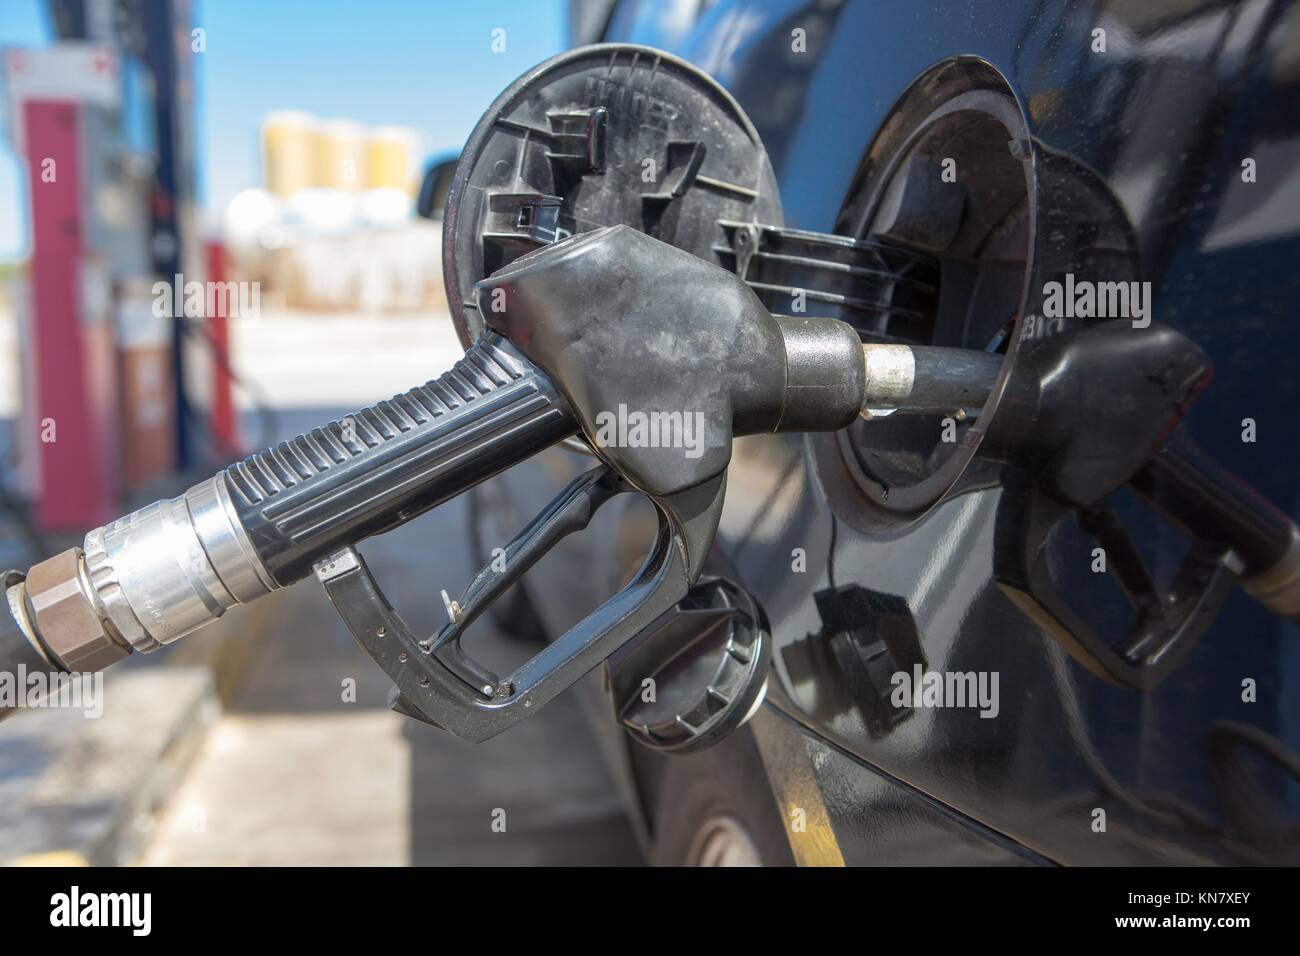 Car refueling on a petrol station. Nozzle detail. Stock Photo